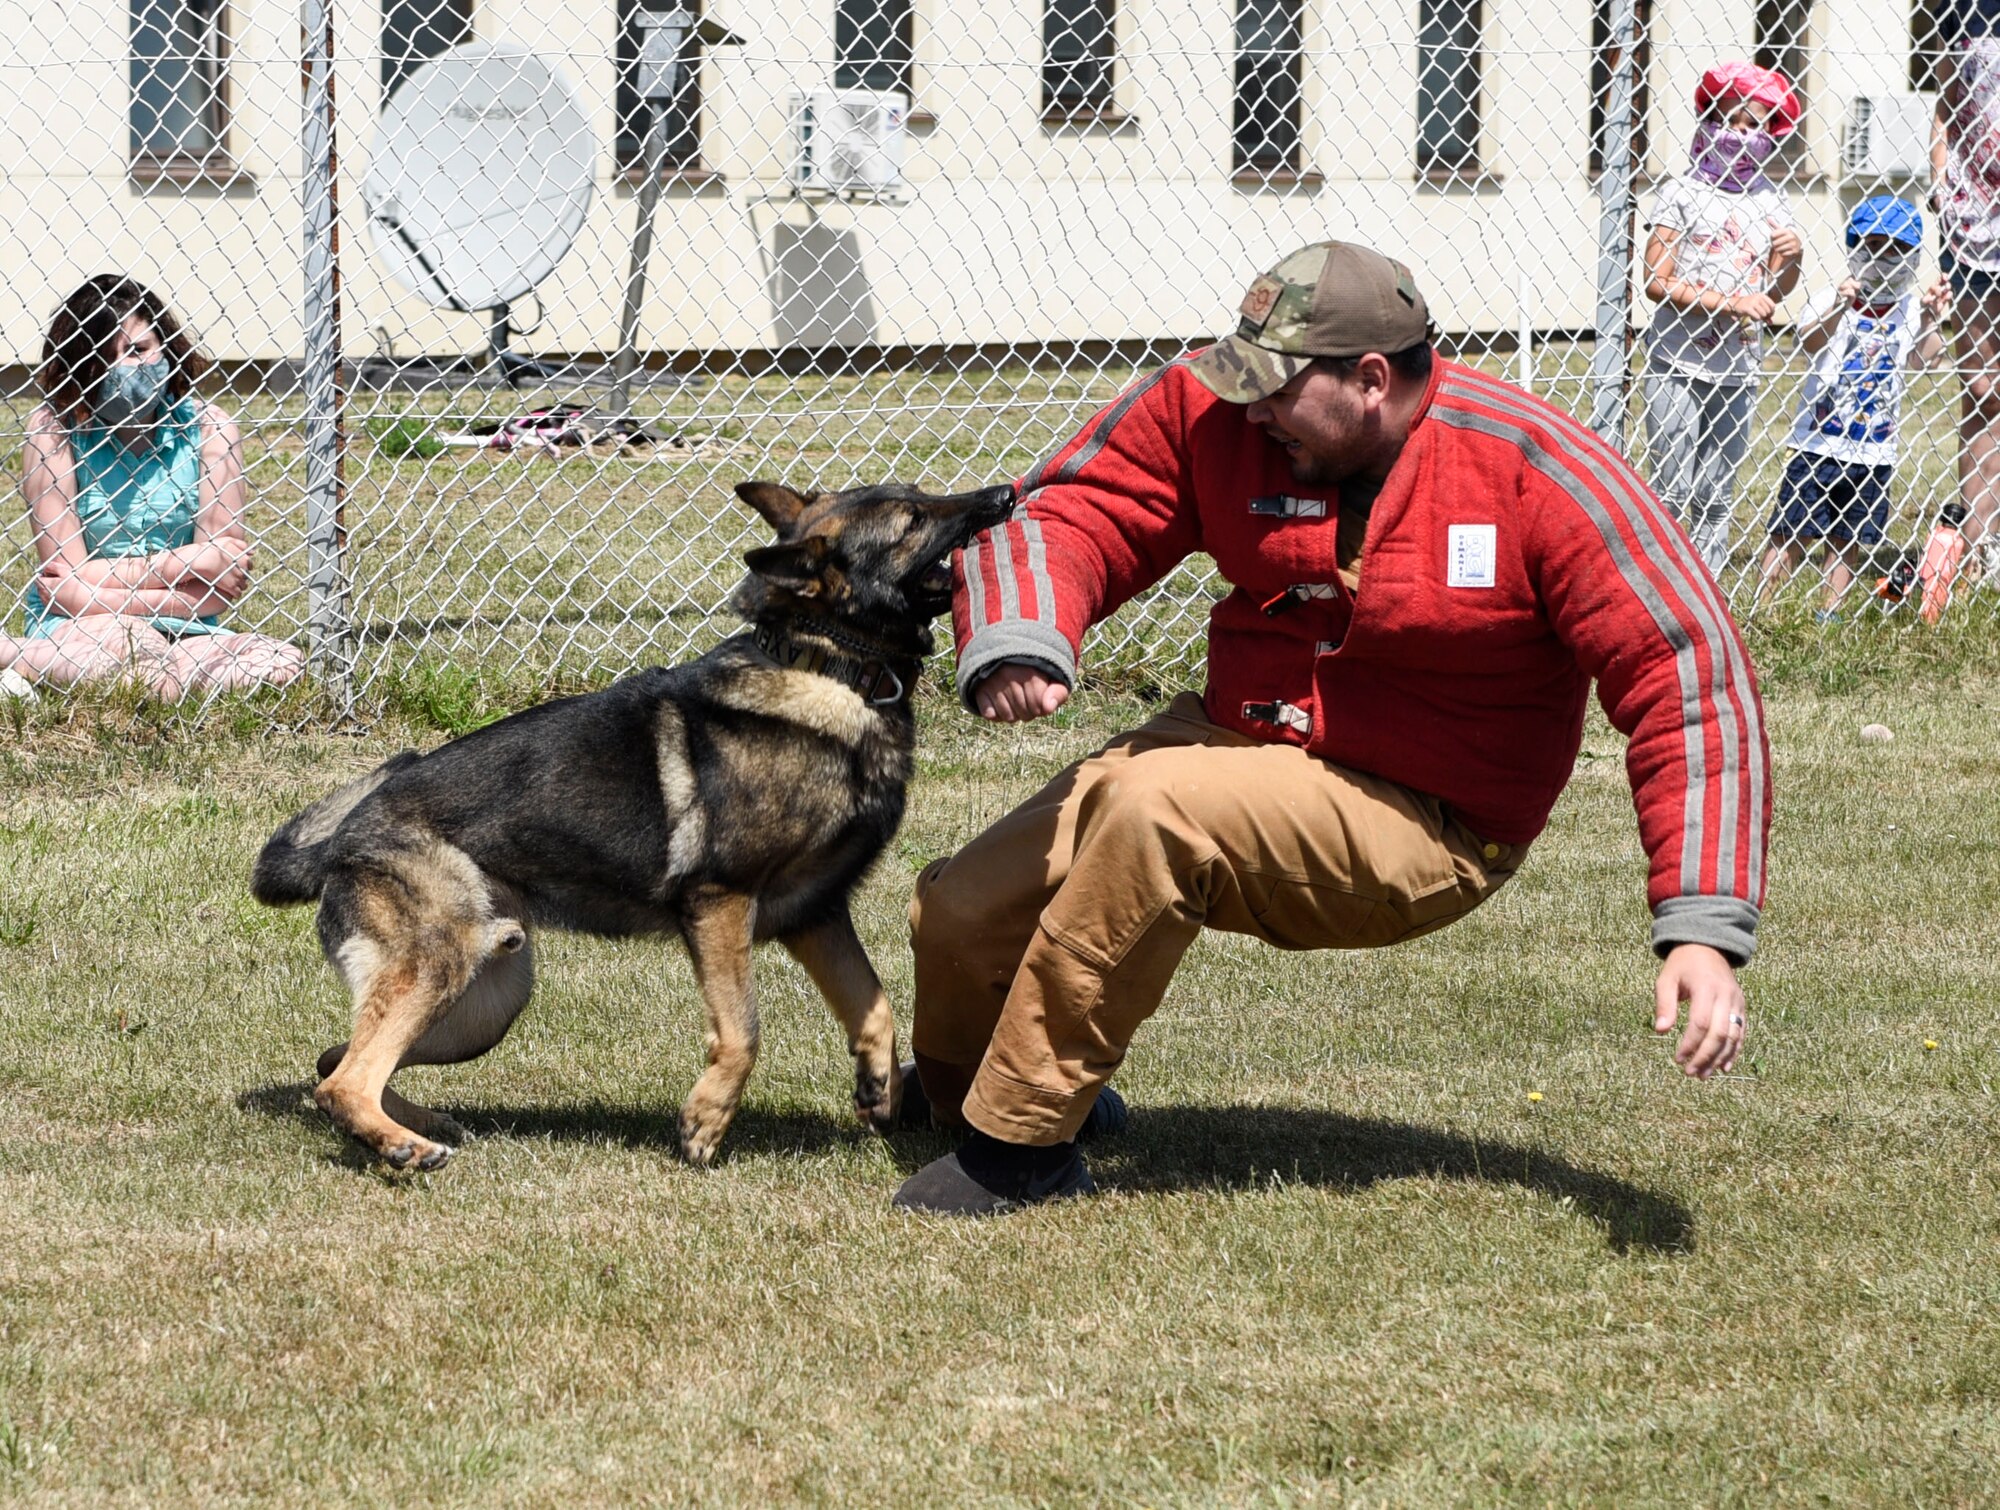 U.S. Air Force Senior Airman Erik Barrera, 52nd Security Forces Squadron military working dog handler, and Axel, an MWD, conduct an intruder exercise at Spangdahlem Air Base, Germany, July 22, 2020. The 52nd SFS MWD handlers performed a demonstration for Spangdahlem AB families and their children. (U.S. Air Force photo by Senior Airman Melody W. Howley)